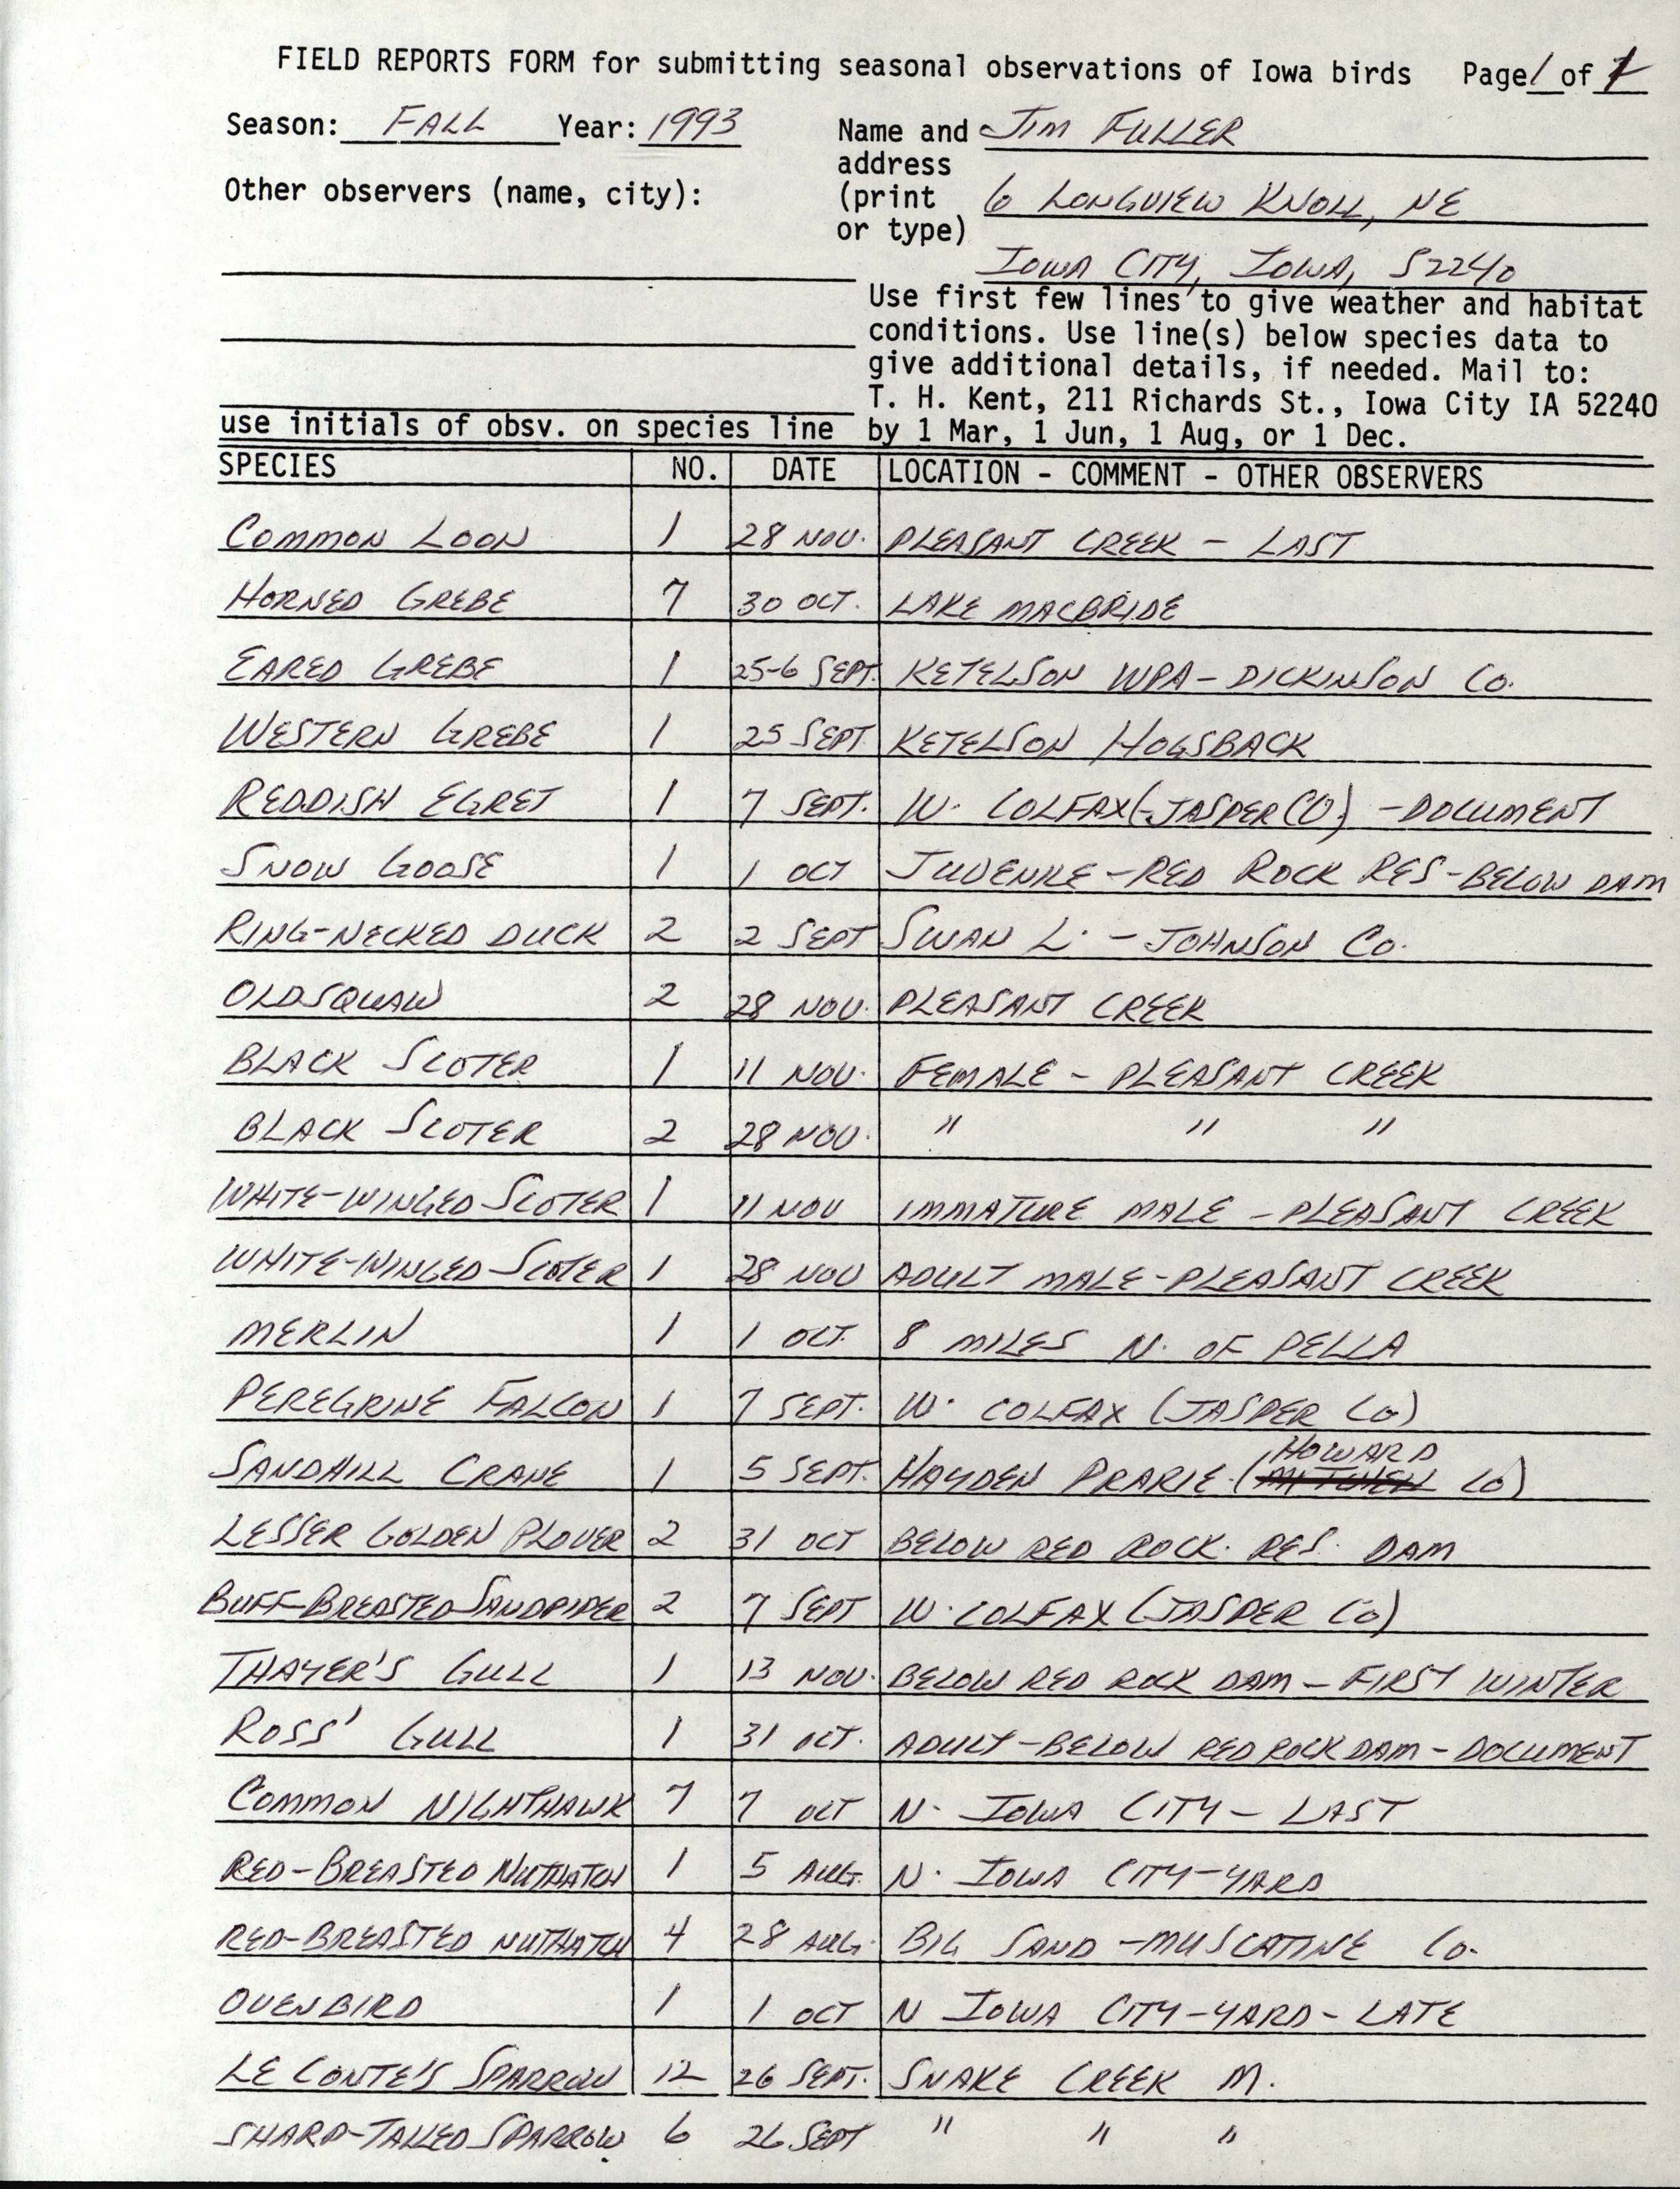 Field reports form for submitting seasonal observations of Iowa birds, James L. Fuller, fall 1993